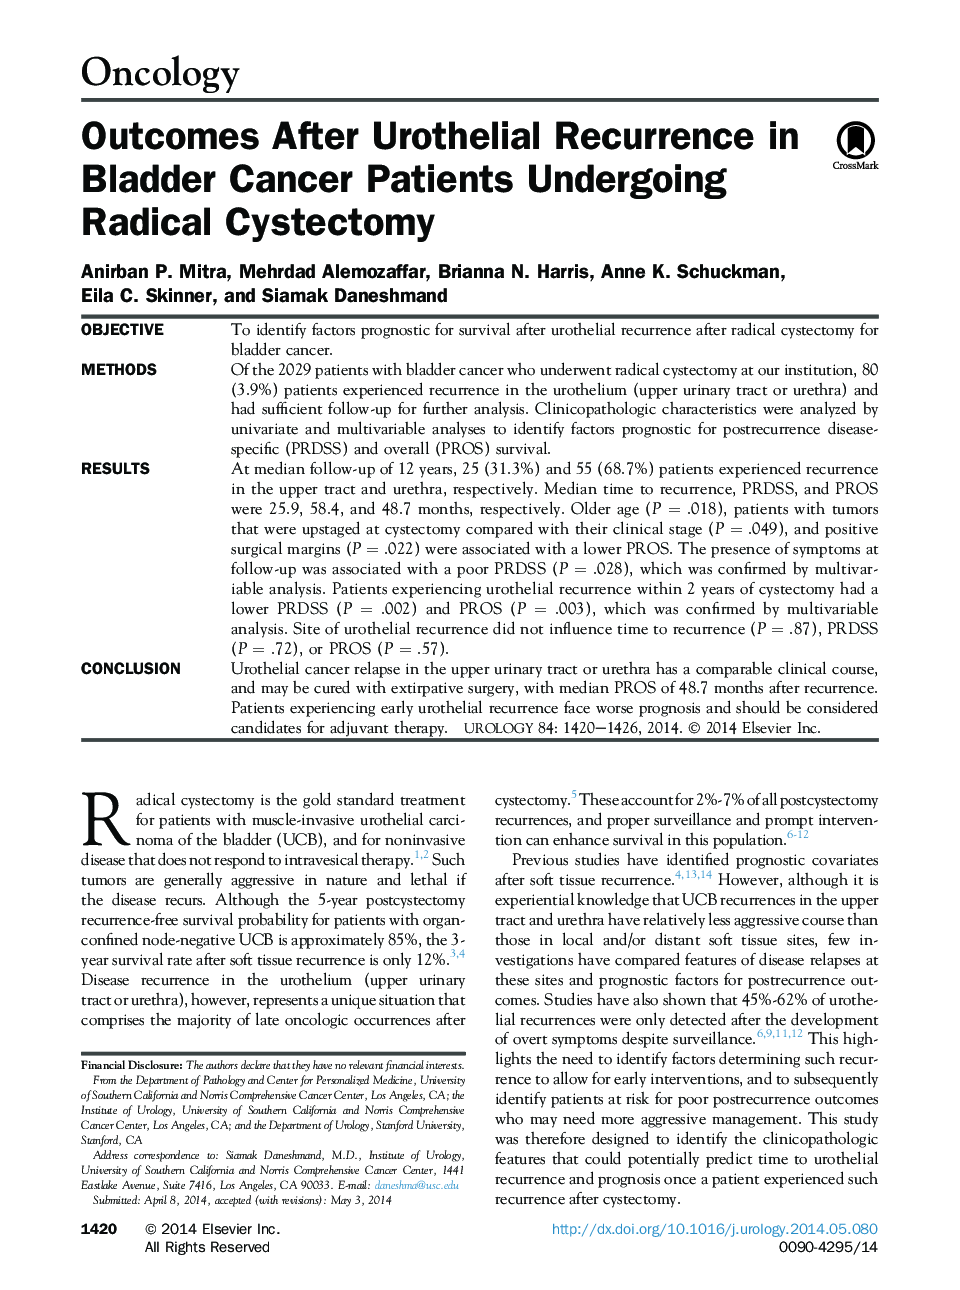 Outcomes After Urothelial Recurrence in Bladder Cancer Patients Undergoing Radical Cystectomy 